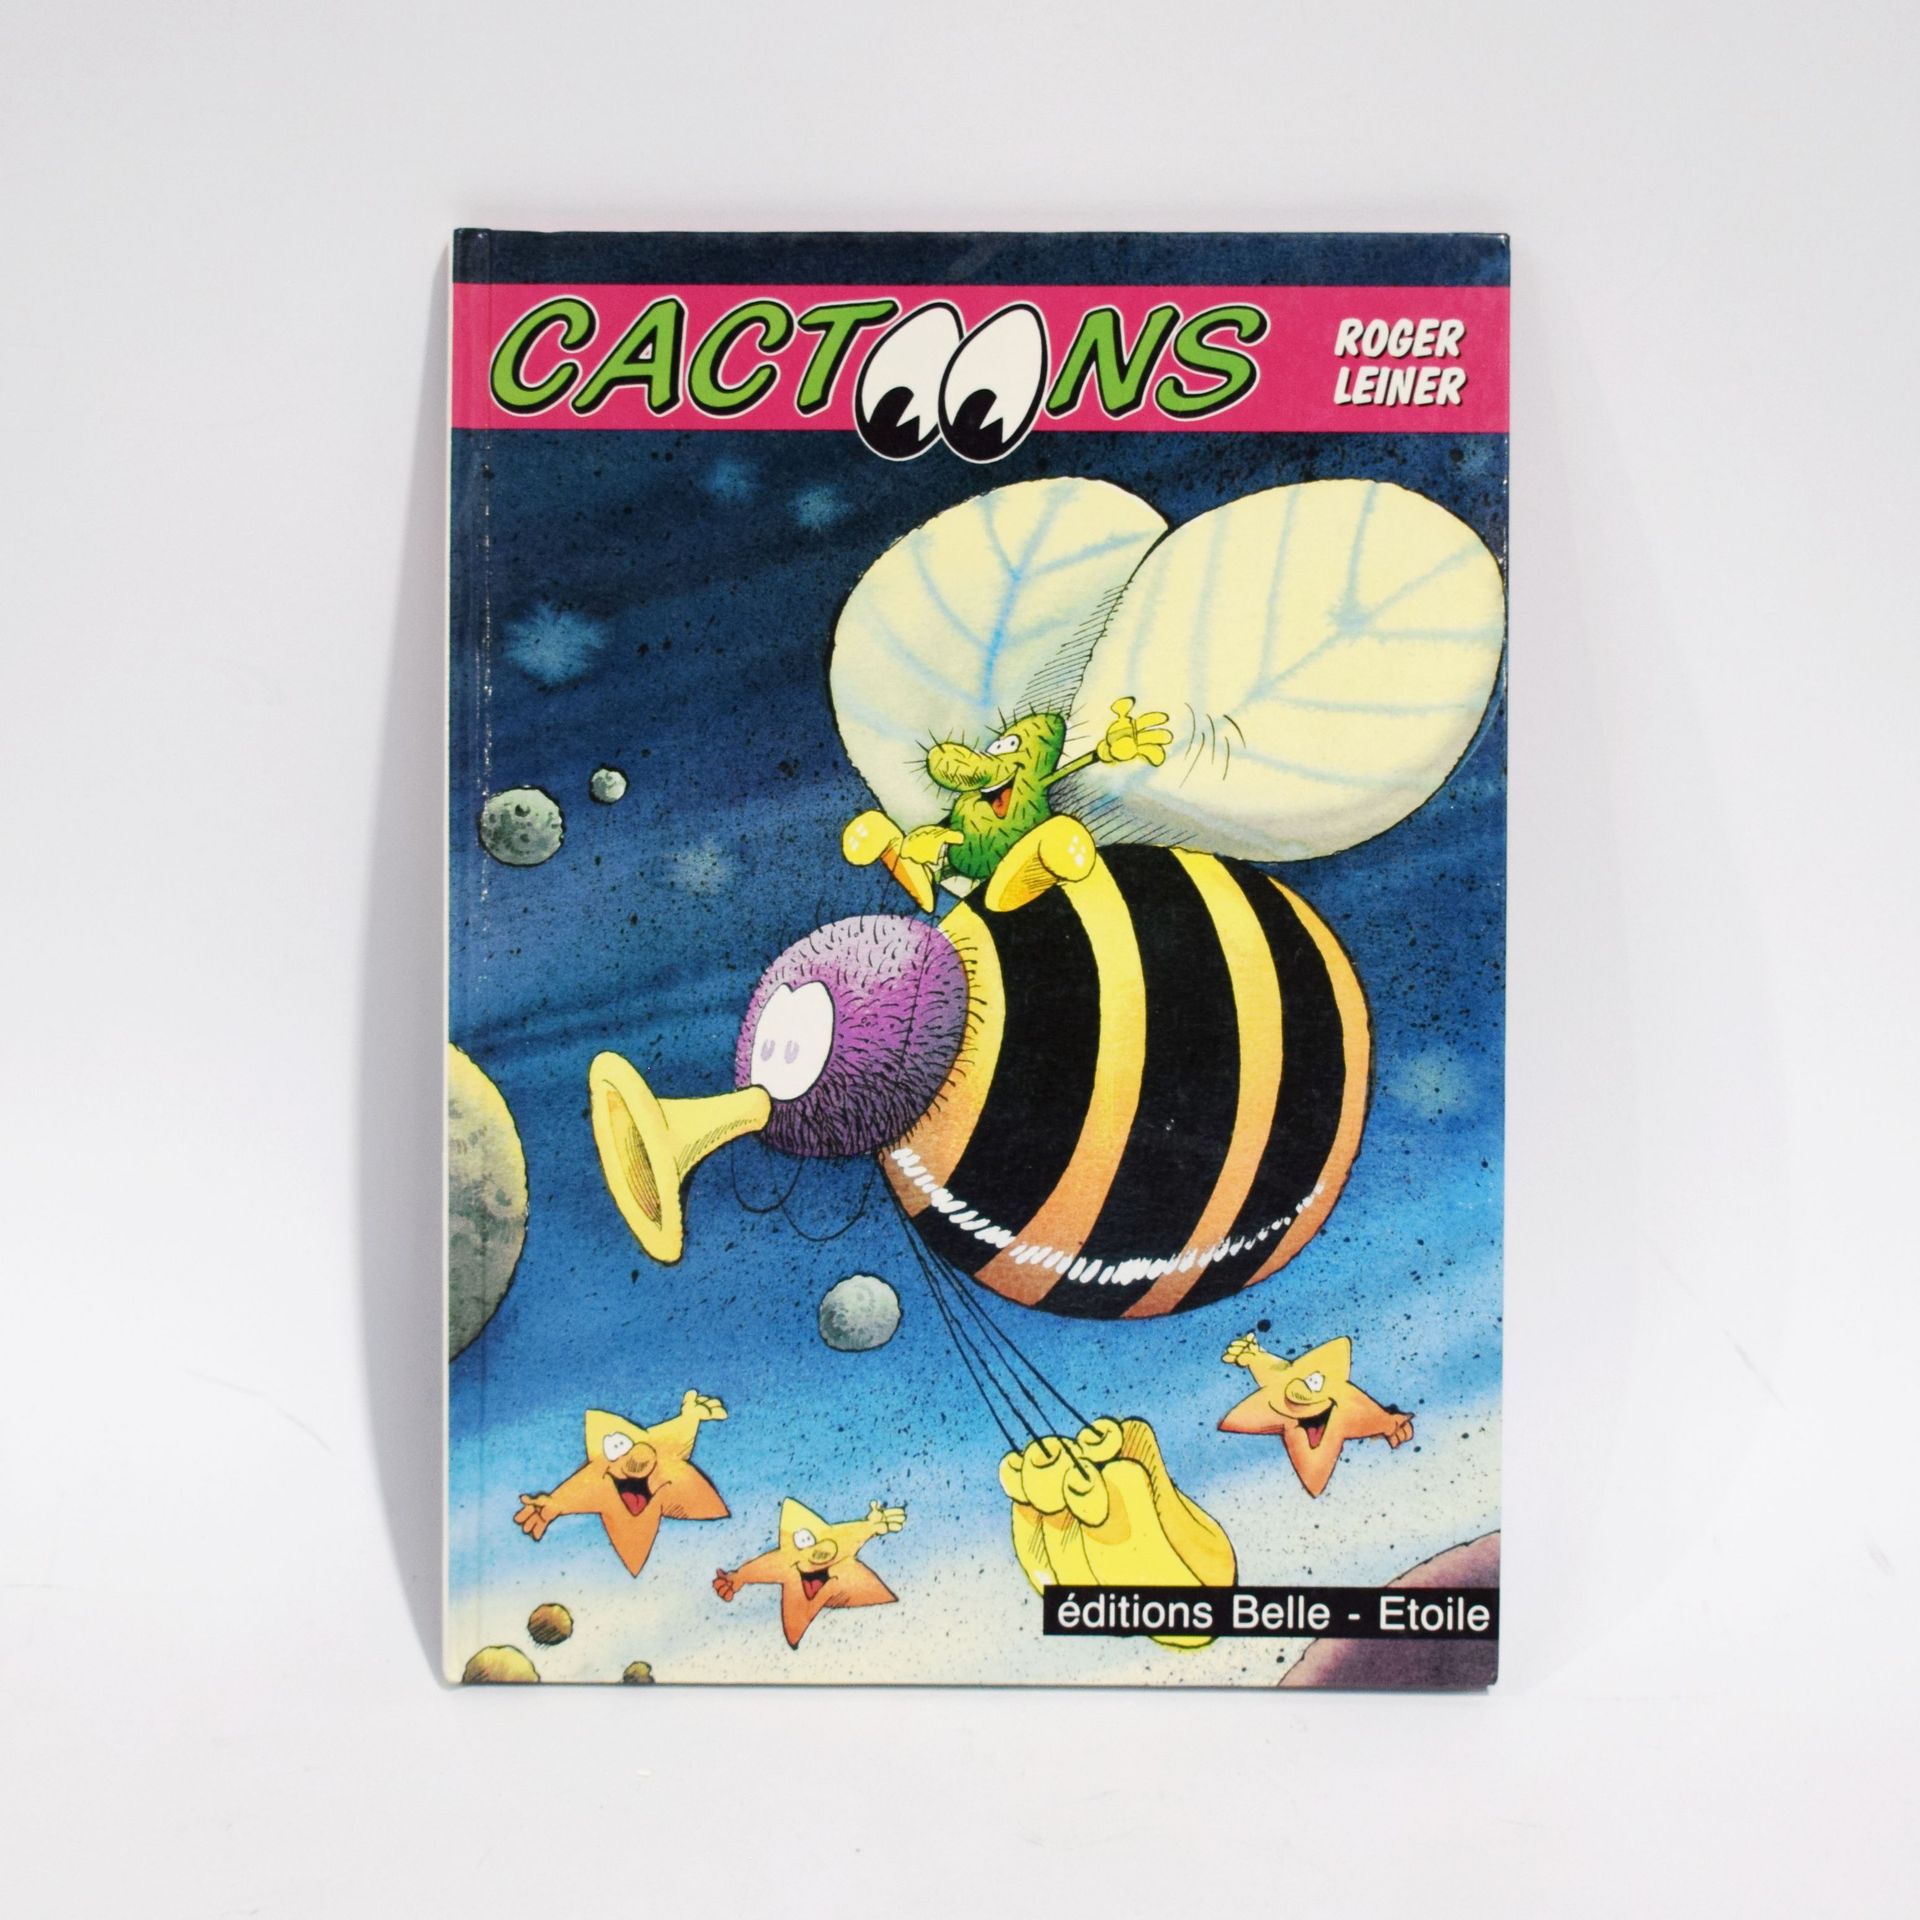 Null (COMICS) Roger LEINER: Cactoons, éditions Belle-Etoile, 1990